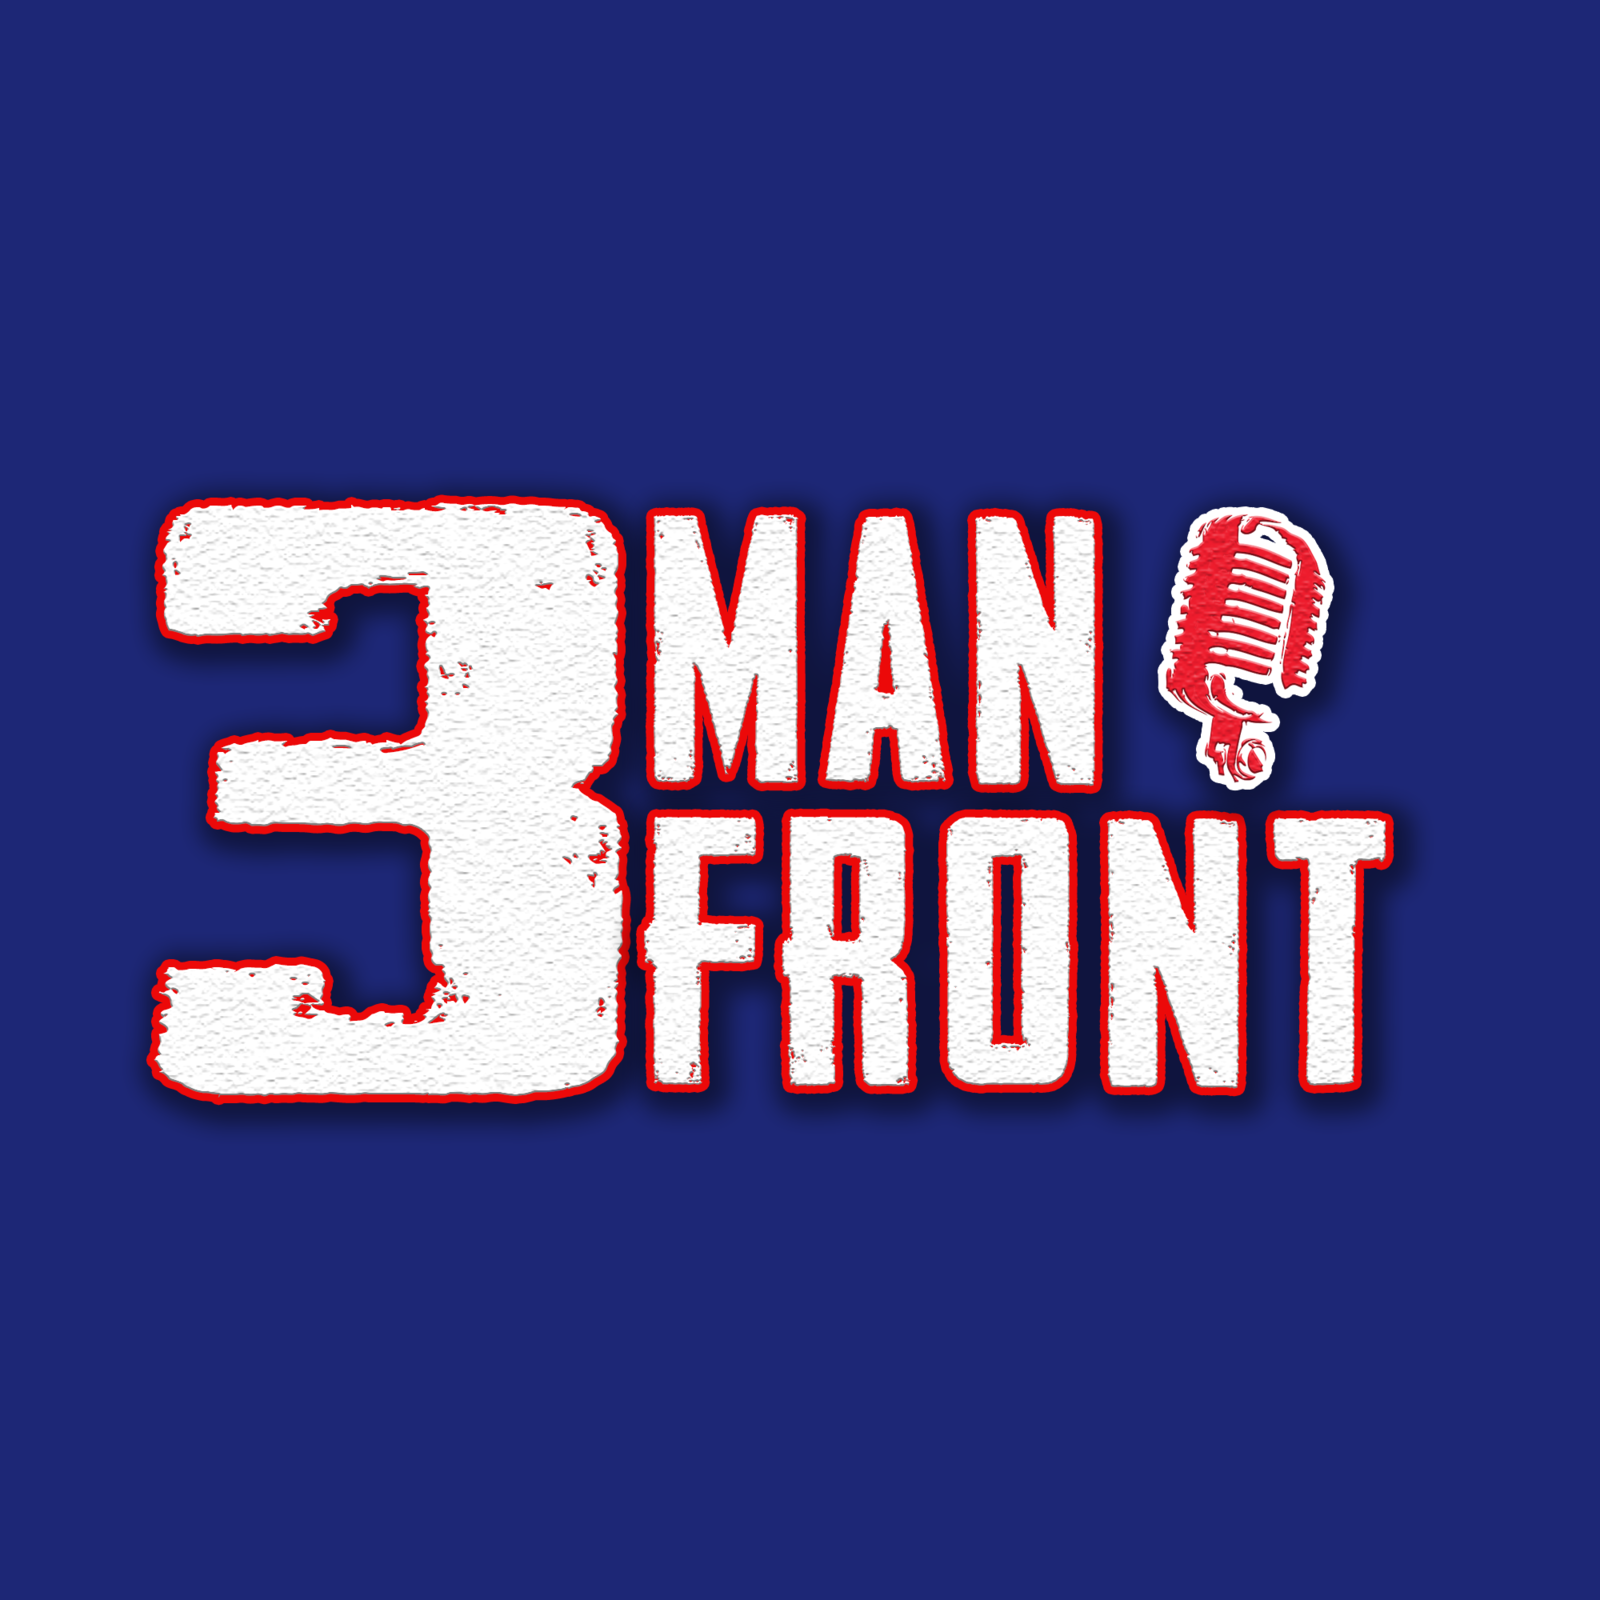 4-30-24 3 Man Front Hour 4: more portal news, school lunches, cartoons and #PatPonders!